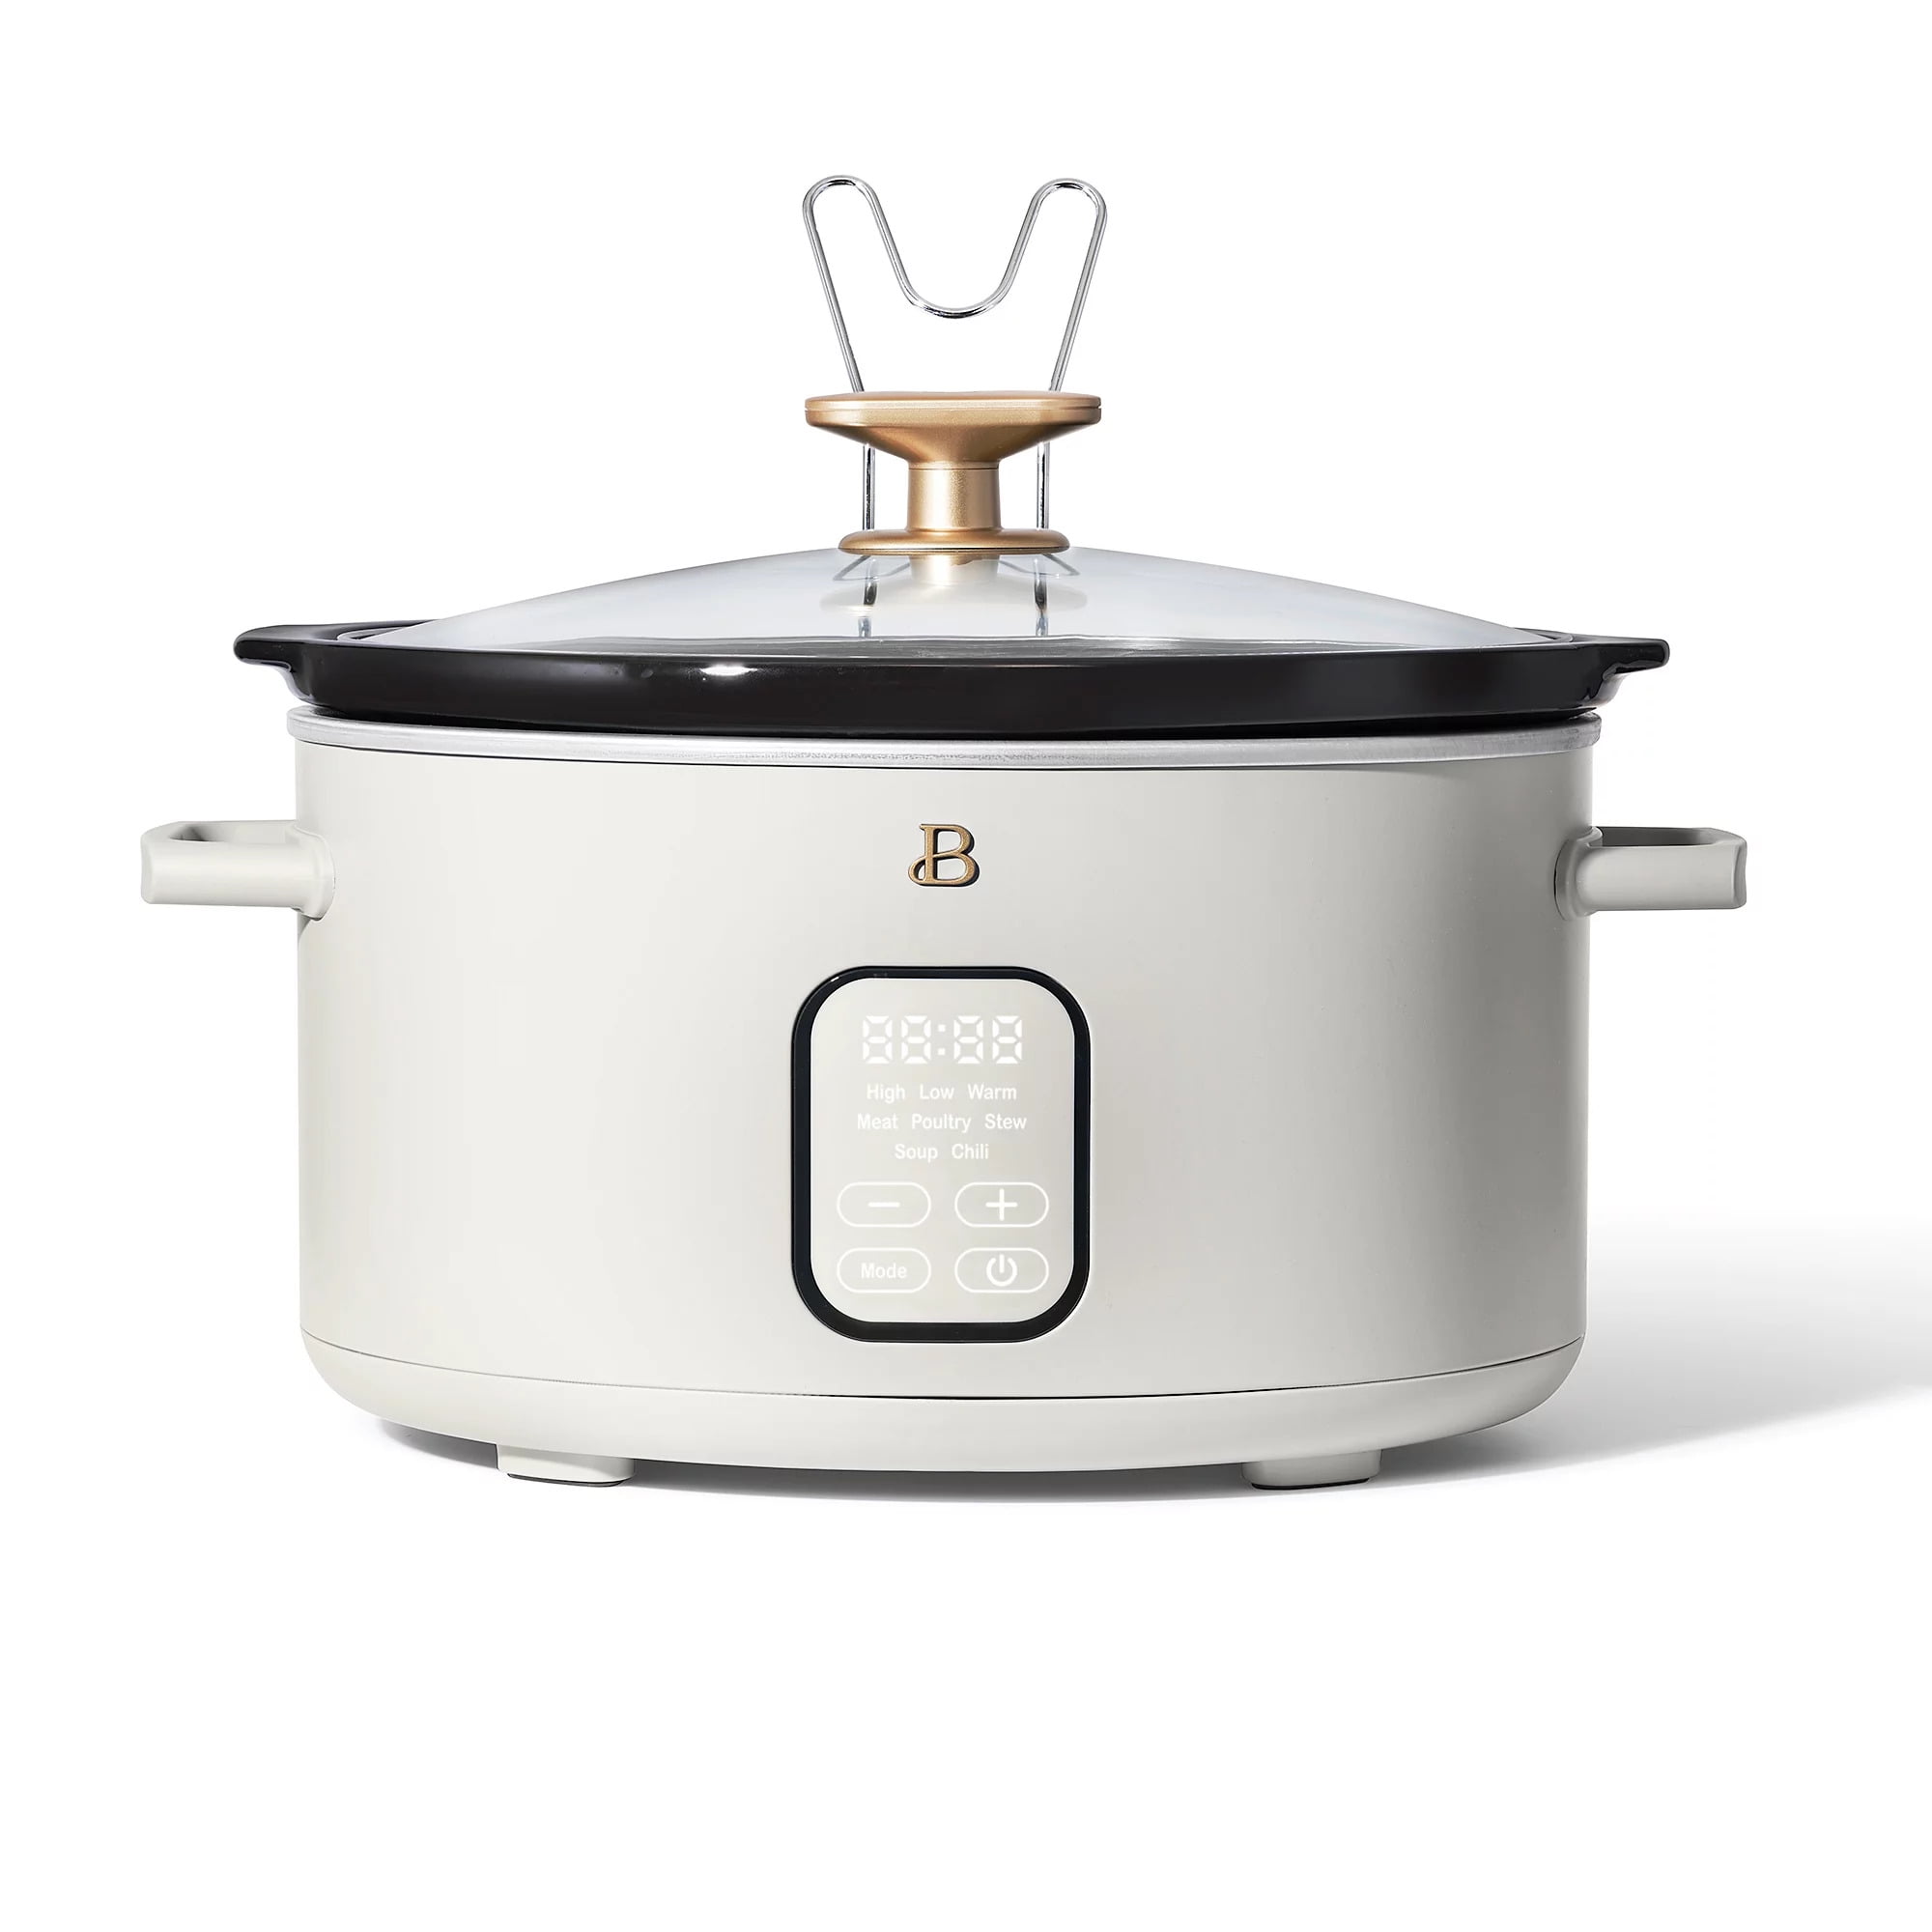 Beautiful 6QT Programmable Slow Cooker, White Icing by Drew - Walmart.com